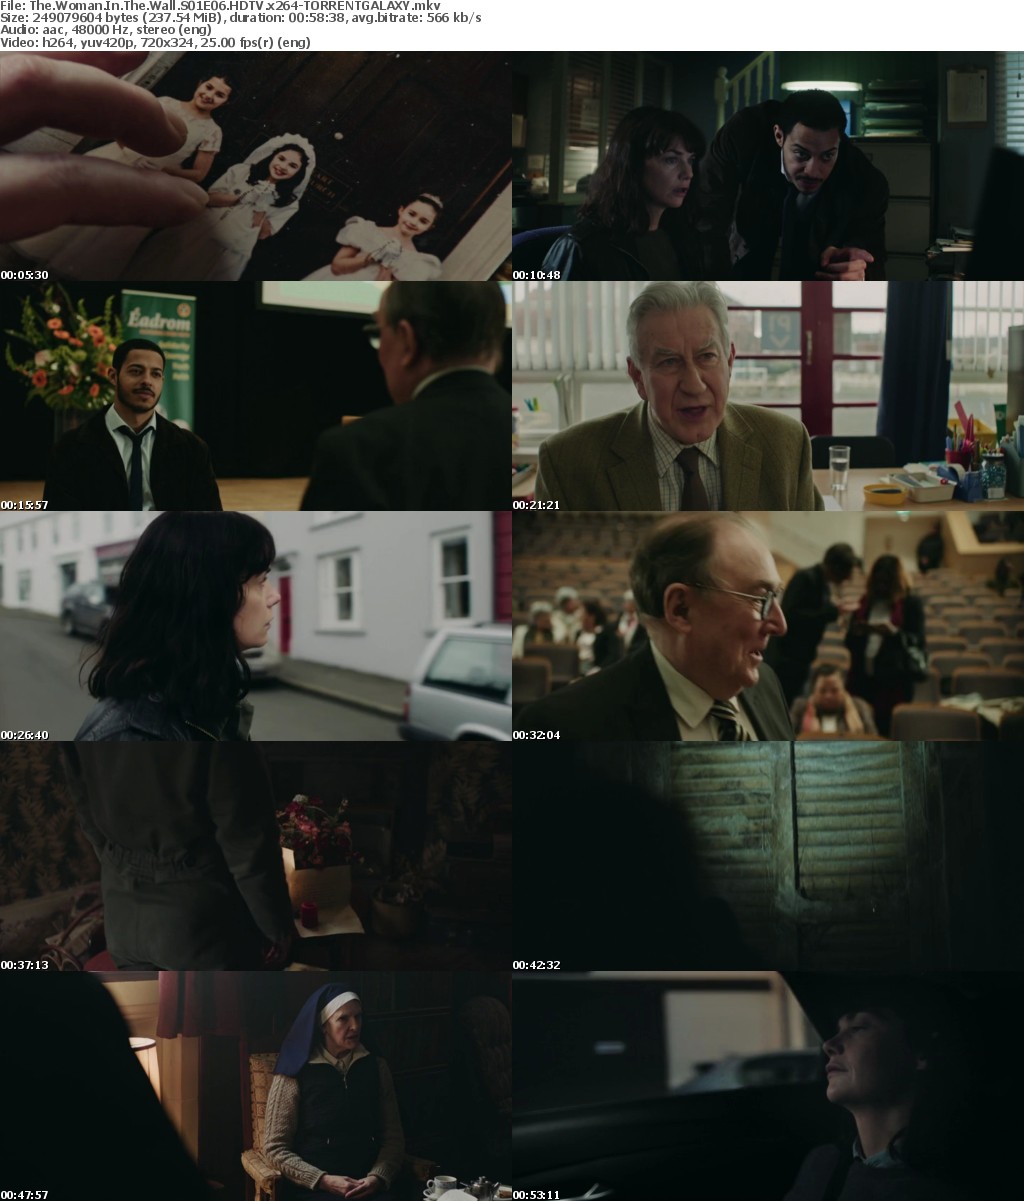 The Woman In The Wall S01E06 HDTV x264-GALAXY